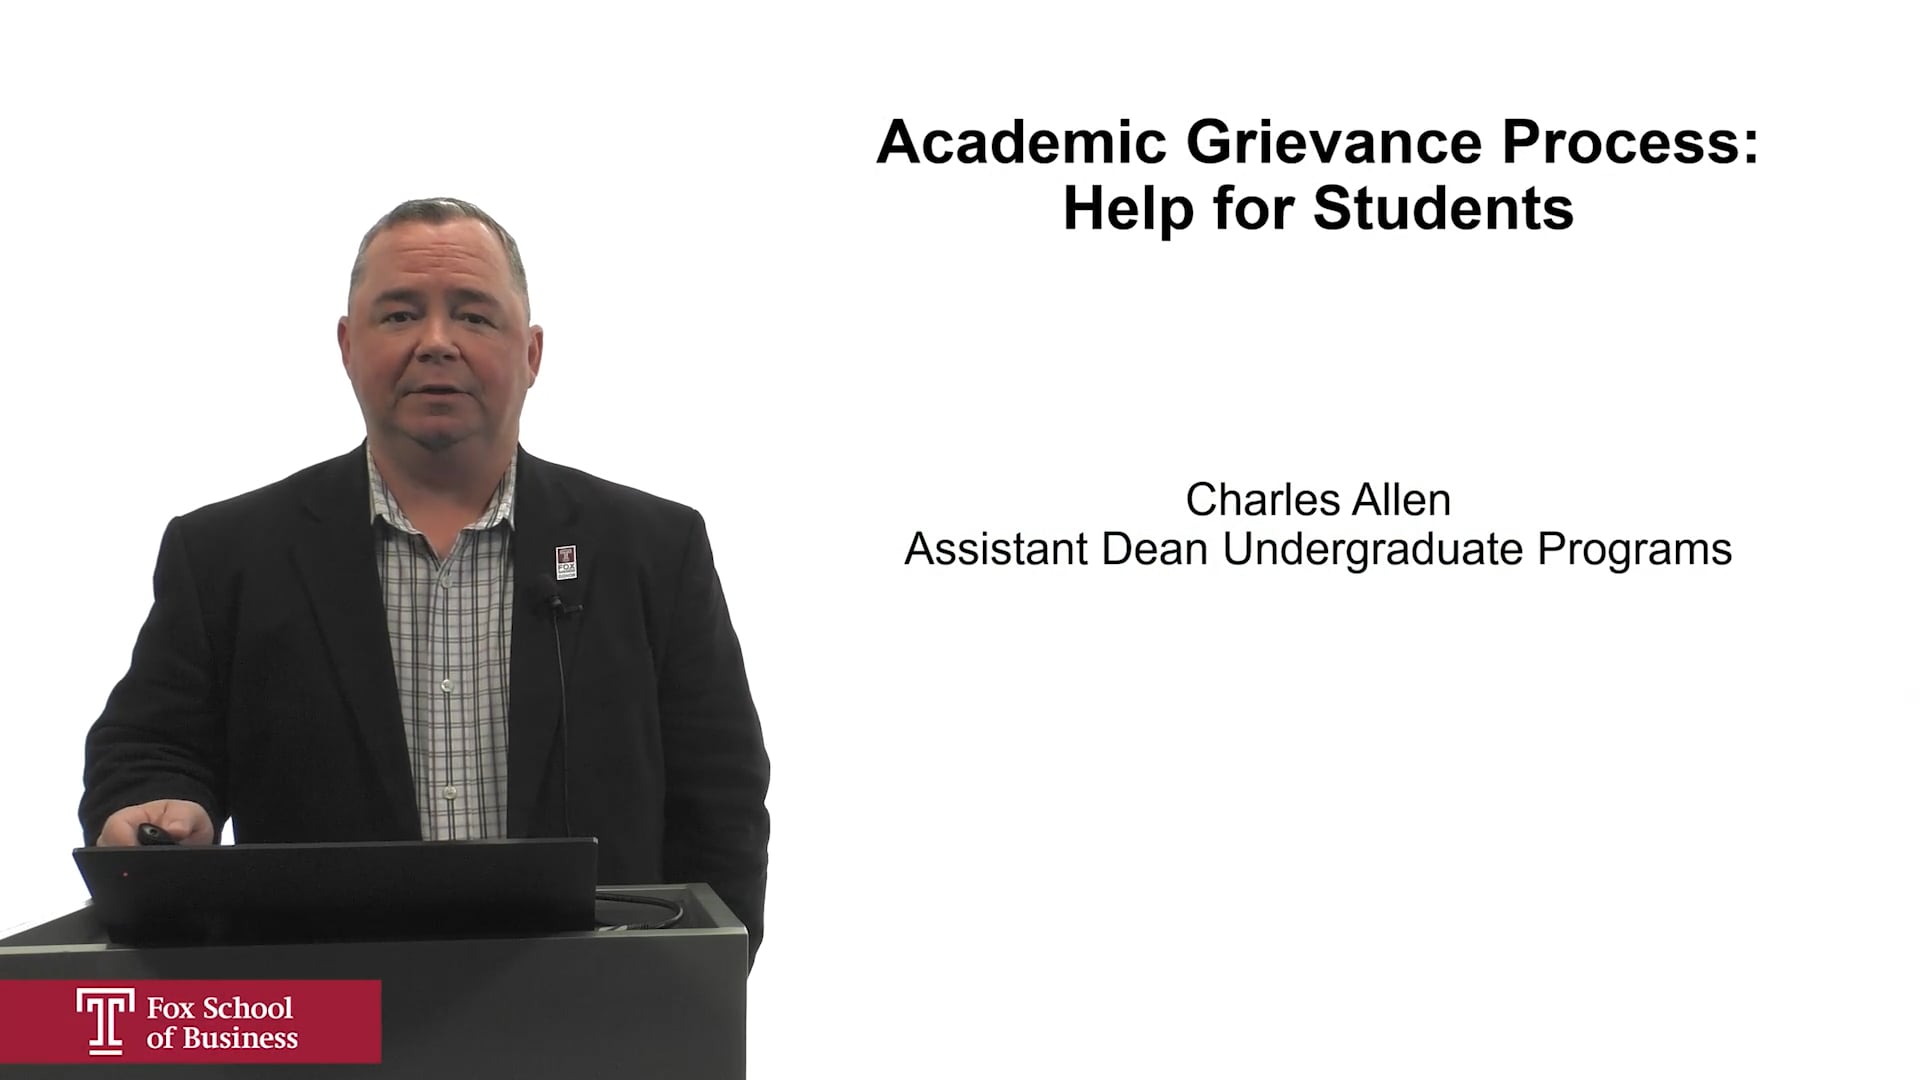 Academic Grievance Process: Help for Students